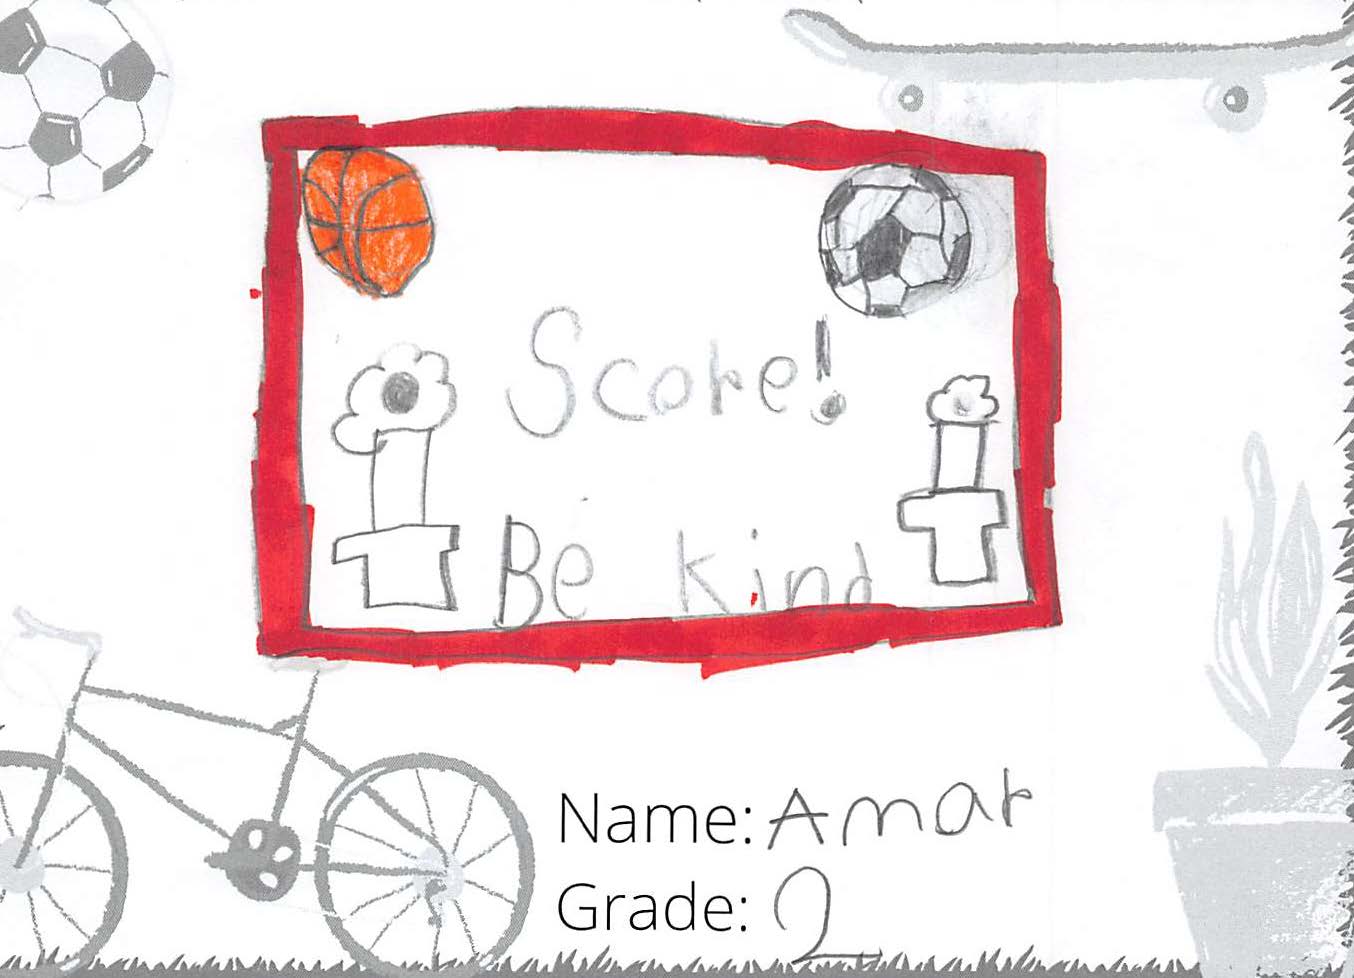 Pencil crayon drawing for the SCORE! logo contest. There are drawings of a basketball and soccer ball. Text reads: SCORE! Be kind.